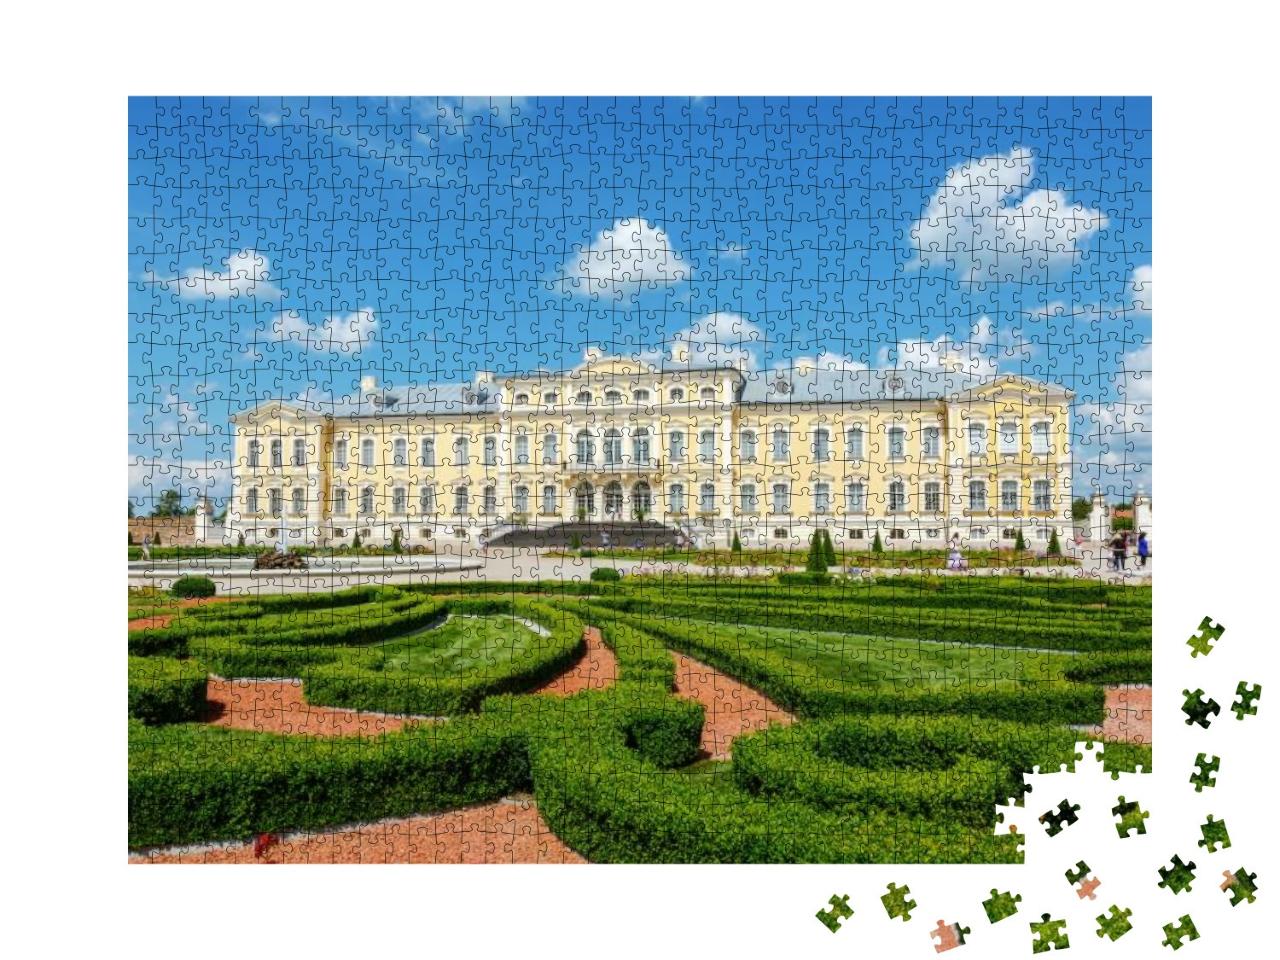 Rundale Castle Latvia... Jigsaw Puzzle with 1000 pieces